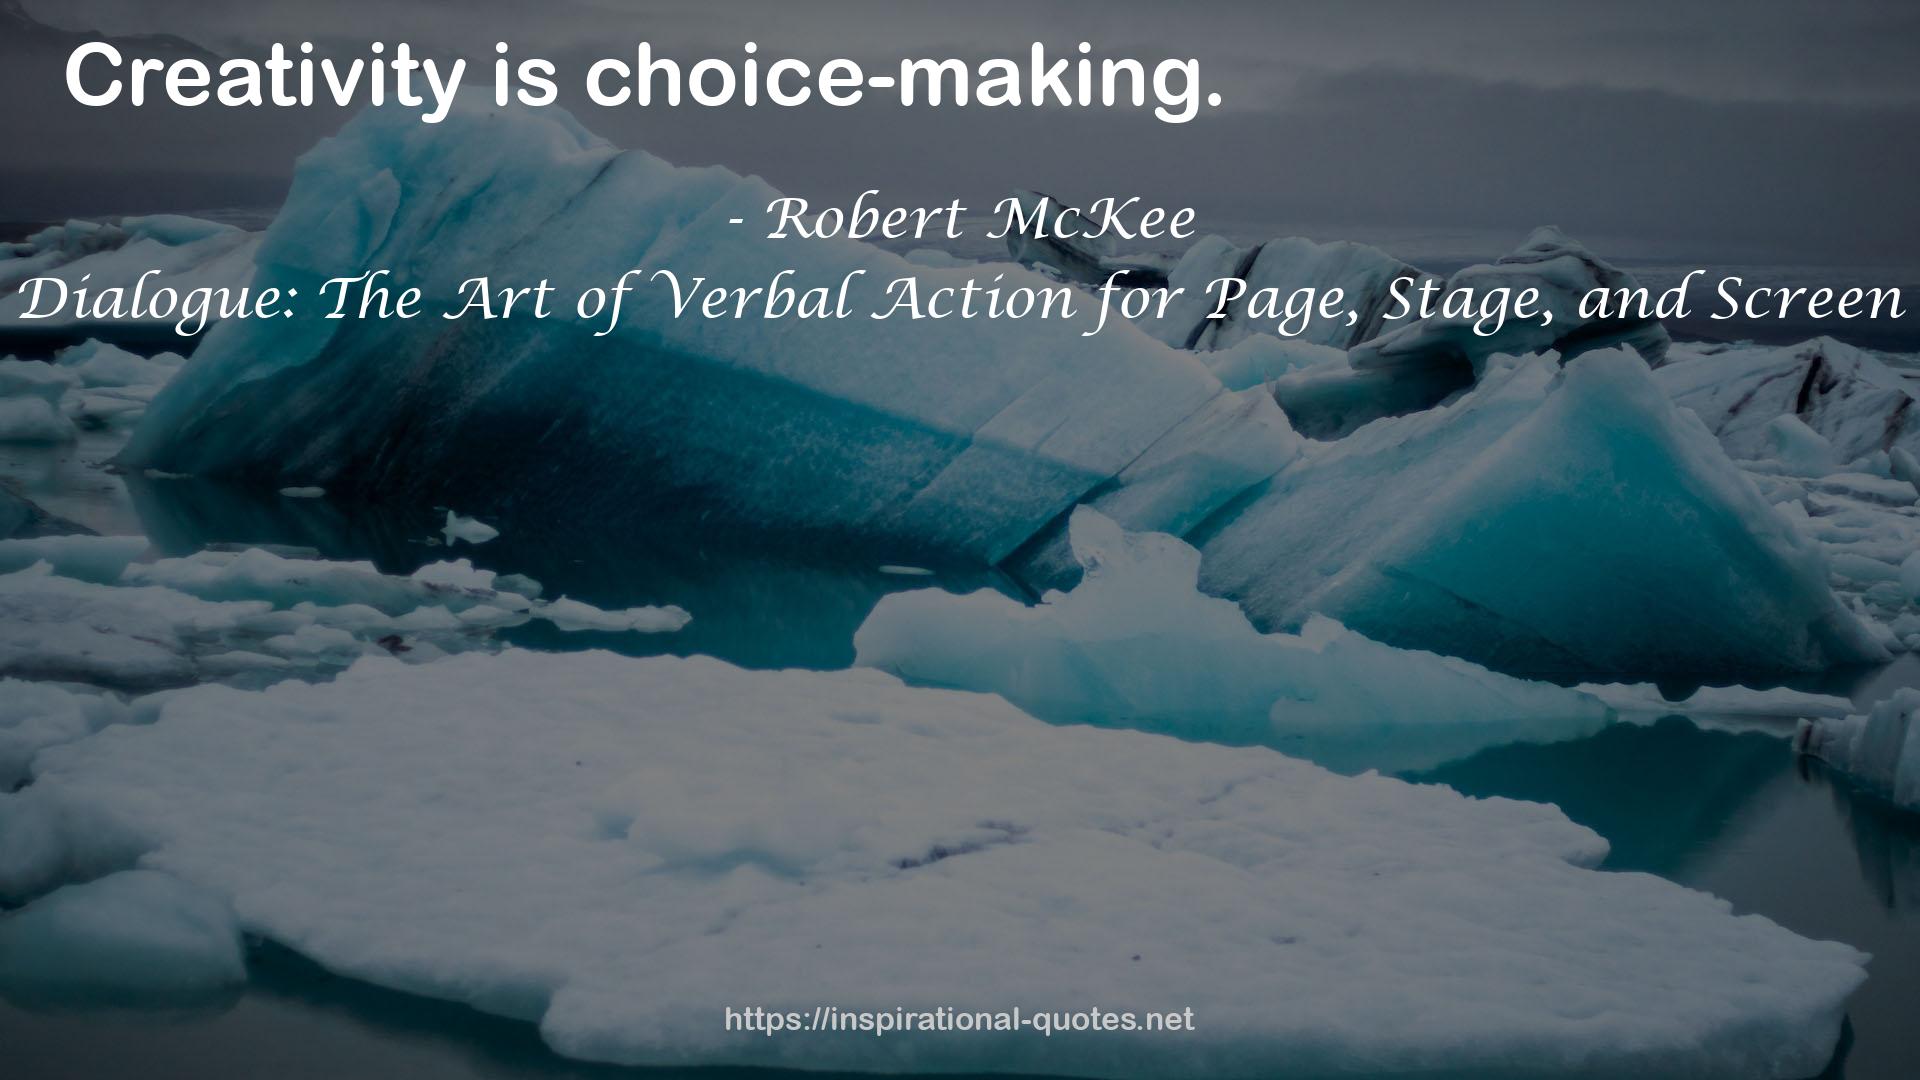 Dialogue: The Art of Verbal Action for Page, Stage, and Screen QUOTES